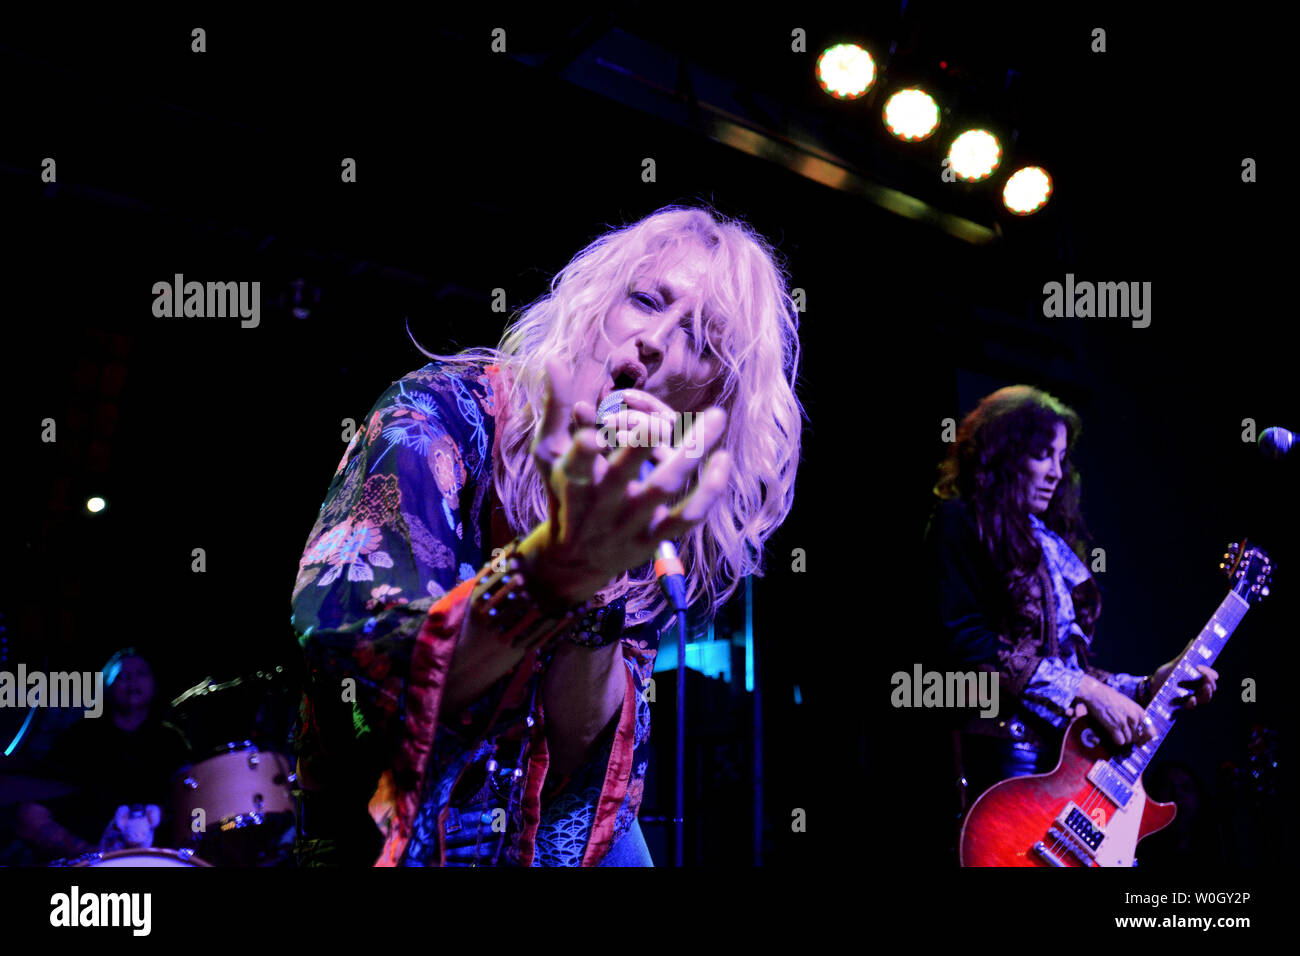 Lead singer Shannon Conley belts out the Led Zeppelin tune 'Whole Lotta Love' assisted by lead guitarist Steph Paynes and drummer Leesa Harrington-Squyres during a performance by the all-girl Lez Zeppelin band at the Altar Bar, a converted church, in Pittsburgh, Pennsylvania on November 10, 2012.  The Led Zeppelin movie 'Celebration Day' is released on Blu-ray and other home formats on November 19, 2012, while their live music lives on with popular groups like Lez Zeppelin in bars and theaters across America.  Not seen is Megan Thomas.   UPI/Pat Benic Stock Photo